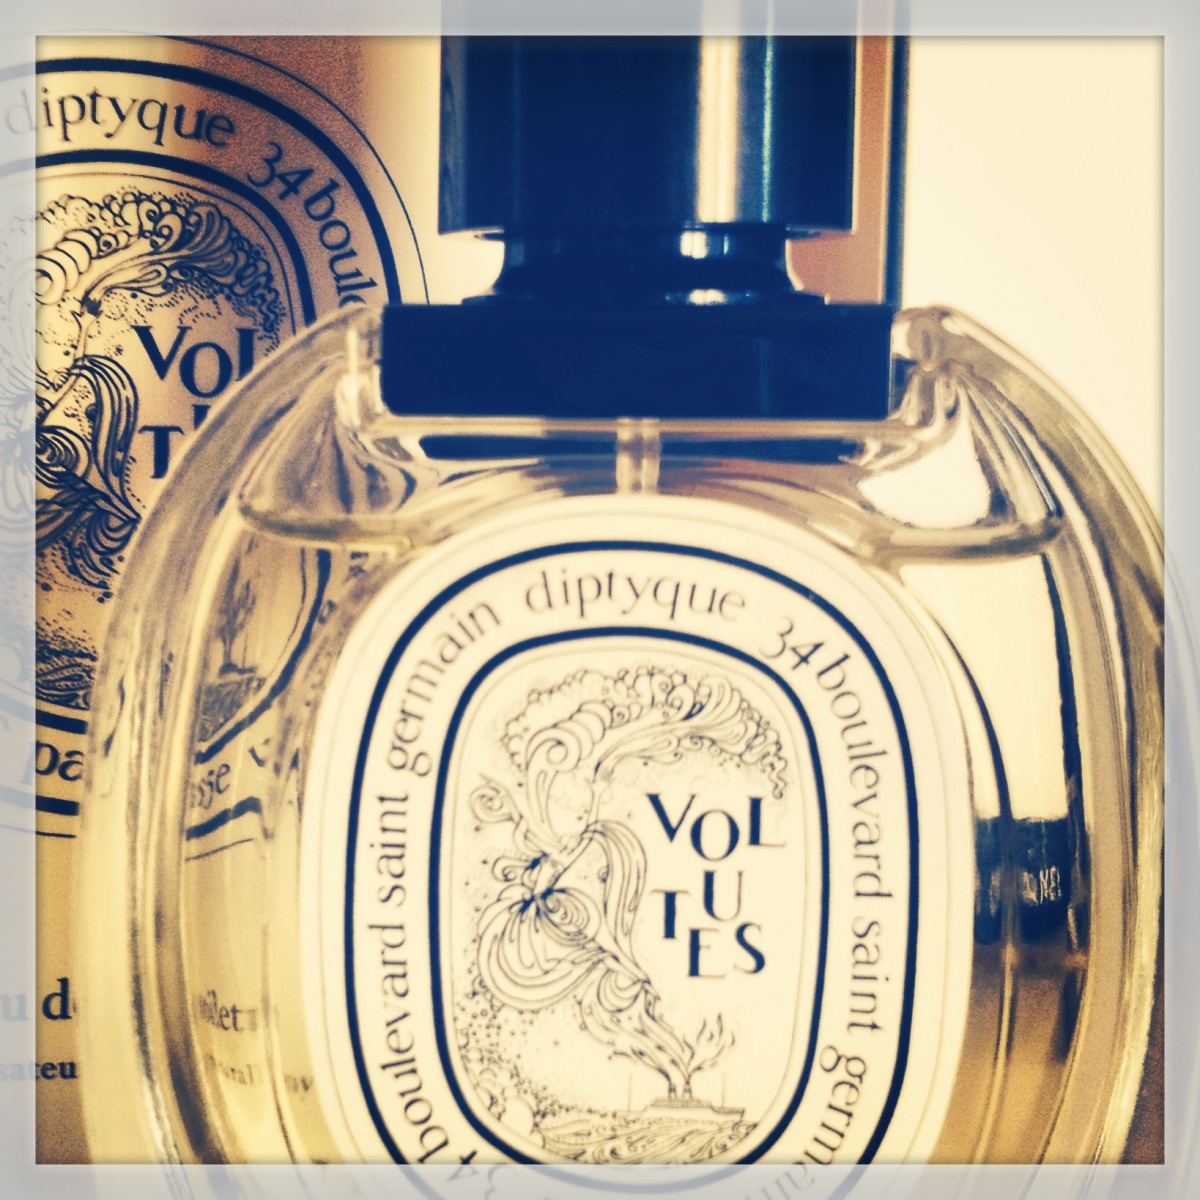 PARIS VLOG - A Day in the Life of A Parisian : GOUTAL PERFUME